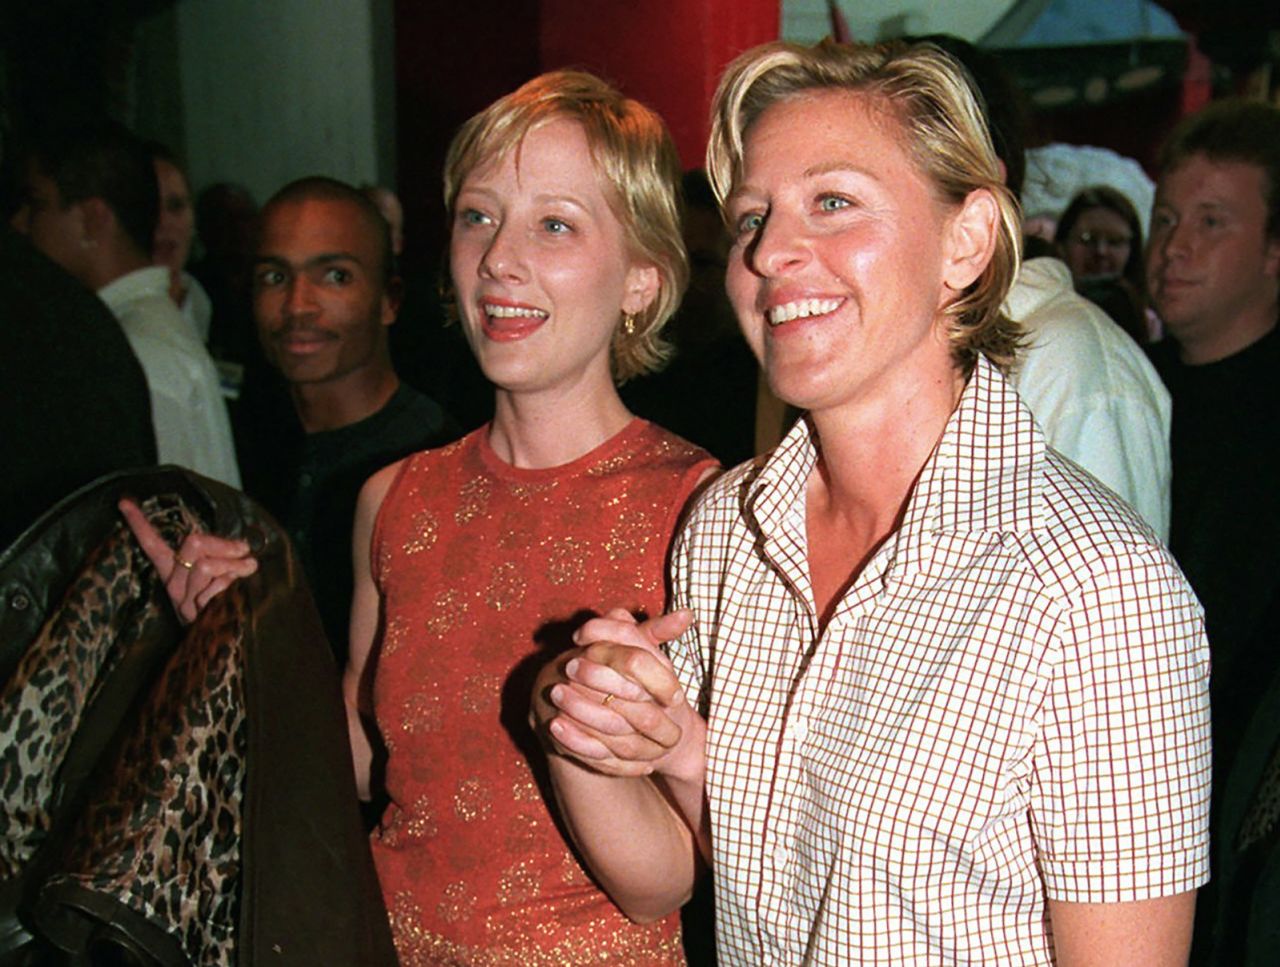 Heche, left, holds hands with comedian Ellen DeGeneres at the world premiere of the movie "Face/Off" in 1997. The two dated for several years.